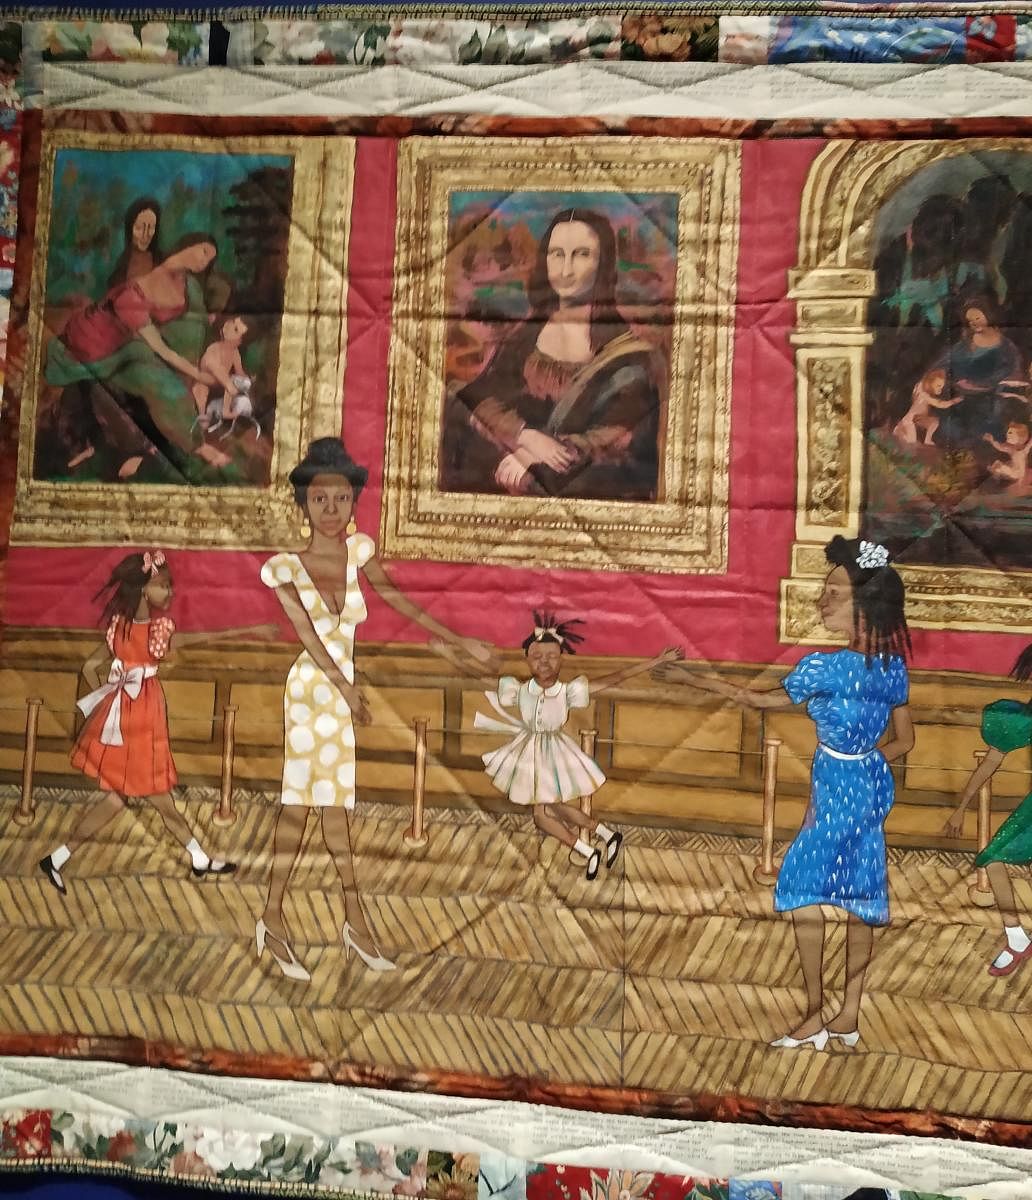 From The French Collection by Faith Ringgold